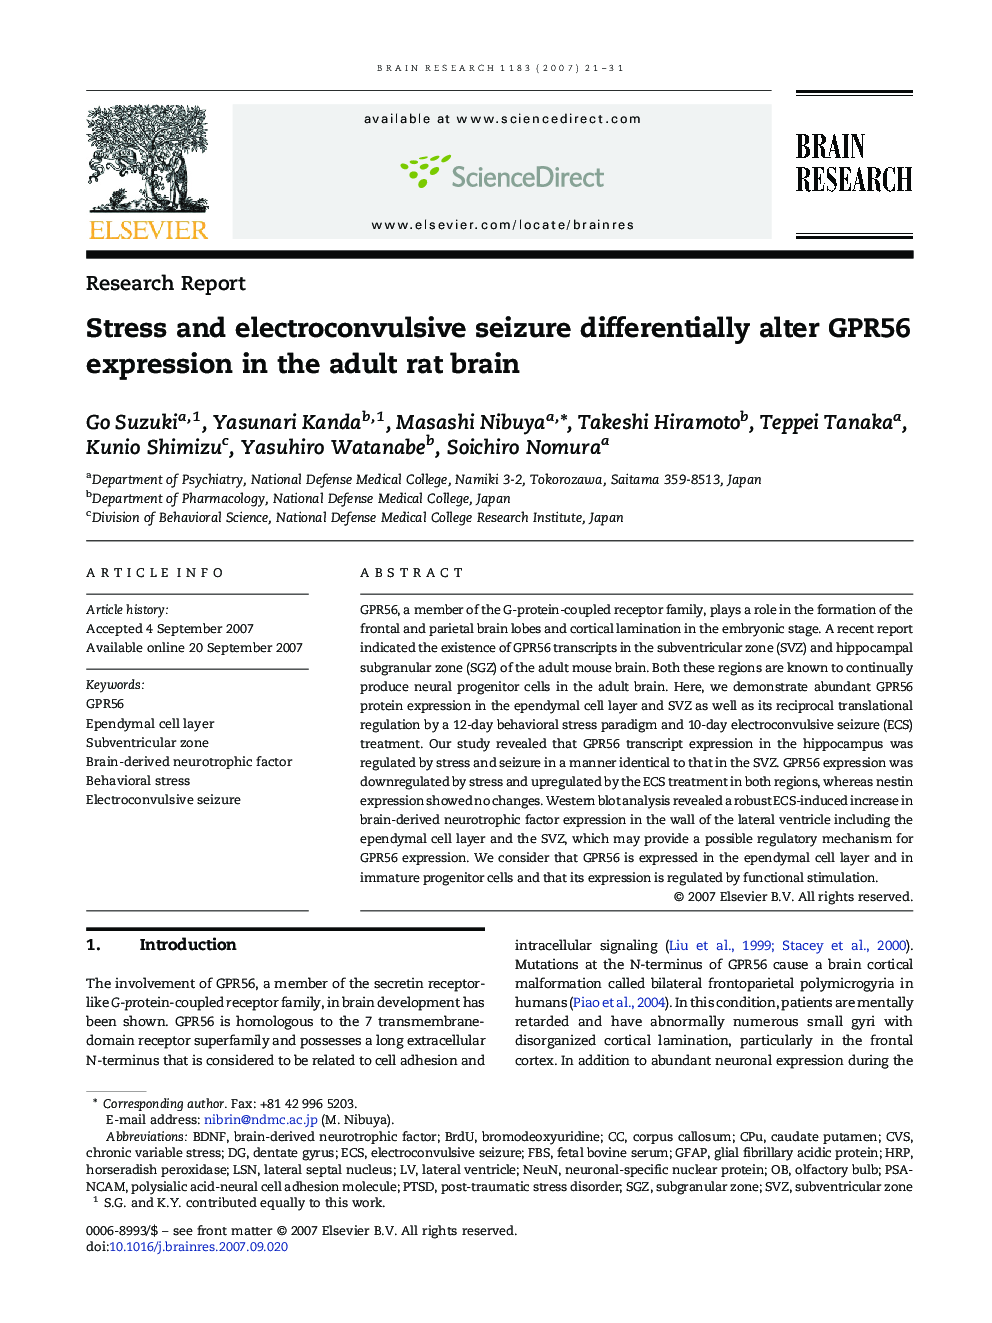 Stress and electroconvulsive seizure differentially alter GPR56 expression in the adult rat brain